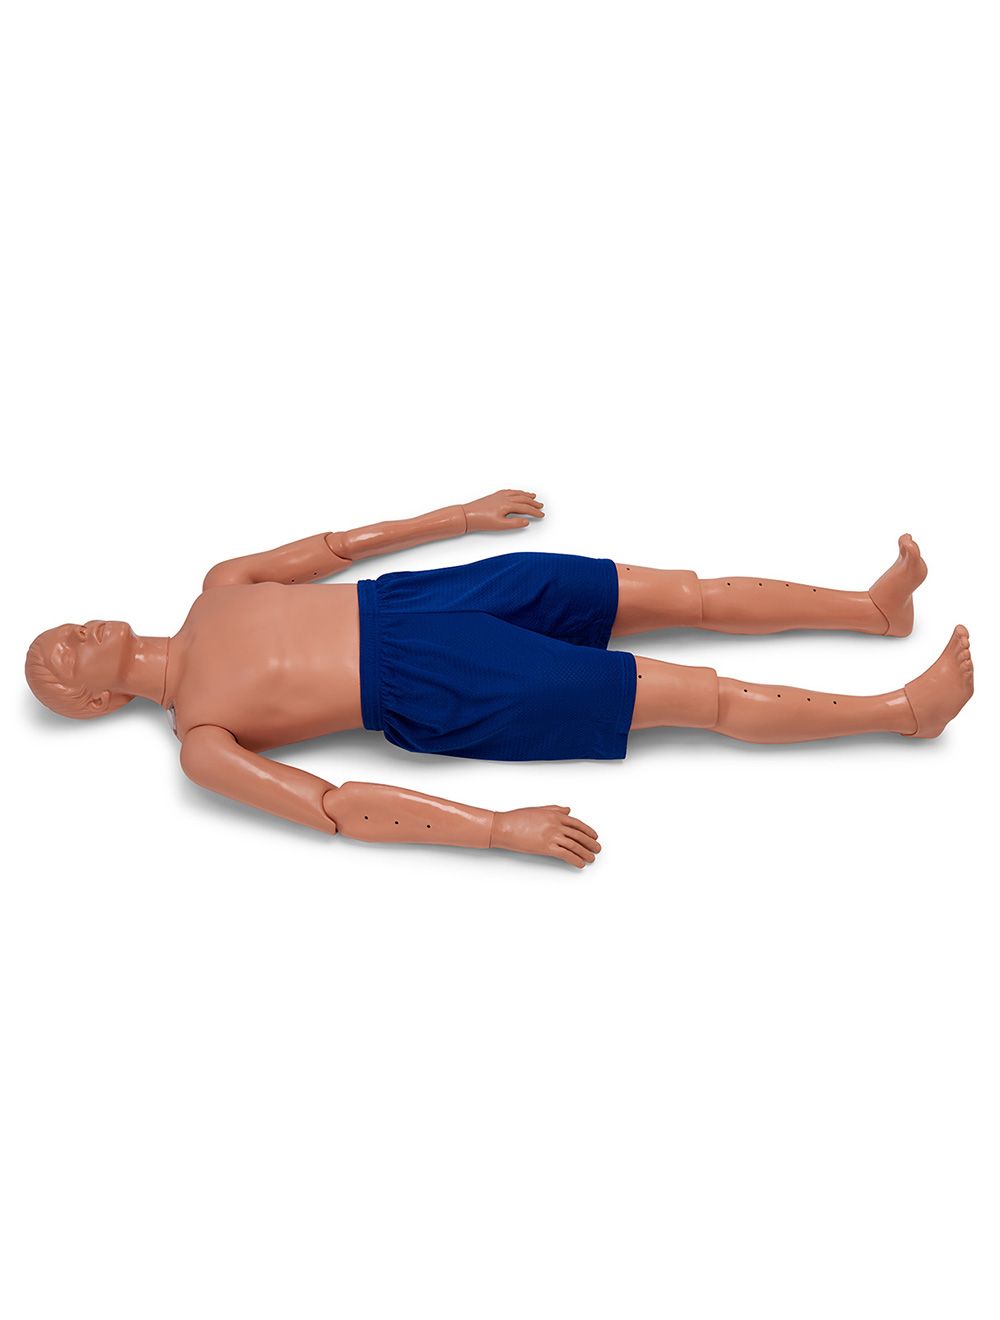 Adult model designed for water rescue and subsequent CPR